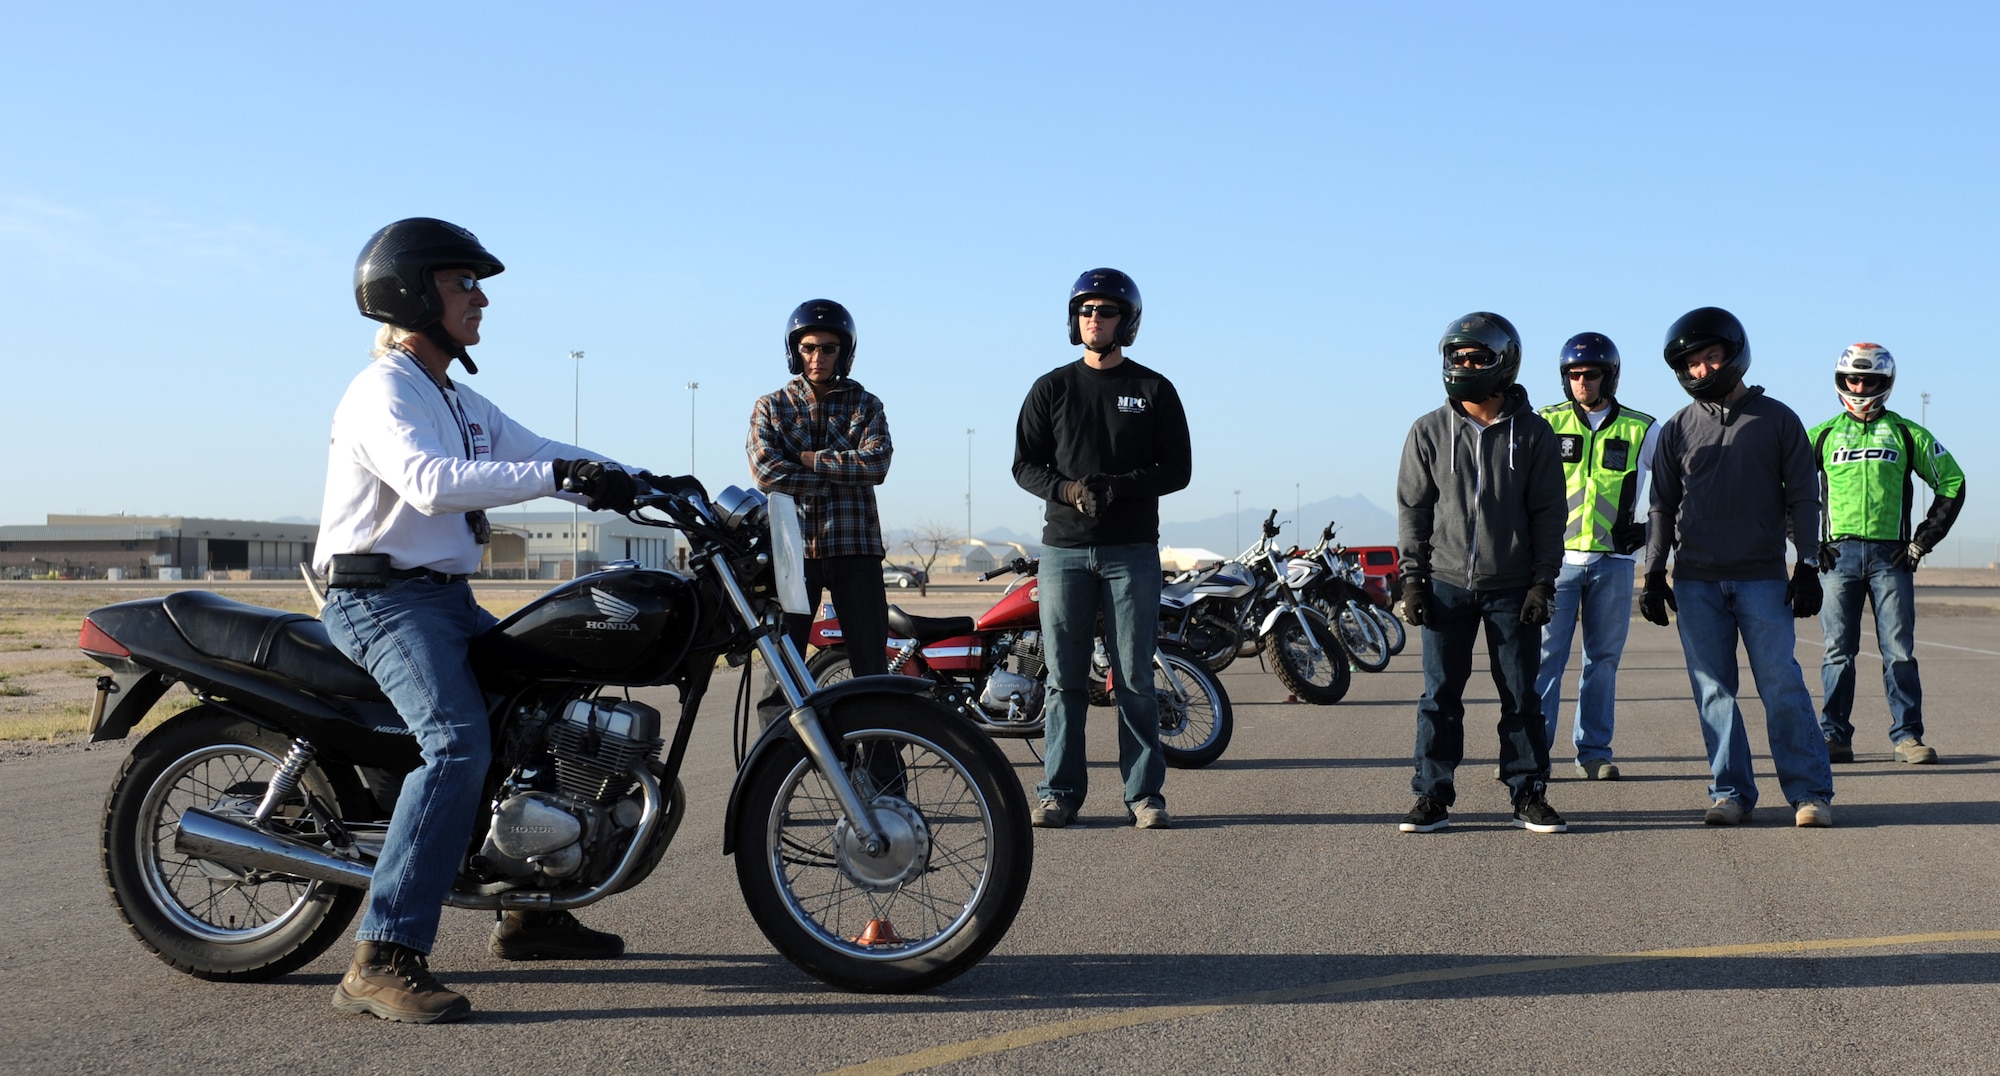 Chris Life, motorcycle safety instructor, demonstrates proper riding procedures to the students of the Motorcycle Safety Basic Rider Course on Davis-Monthan Air Force Base, Ariz., May 8, 2012. The course teaches student everything from mounting and dismounting a motorcycle to emergency braking. (U.S. Air Force photo by Airman 1st Class Timothy D. Moore/Released)